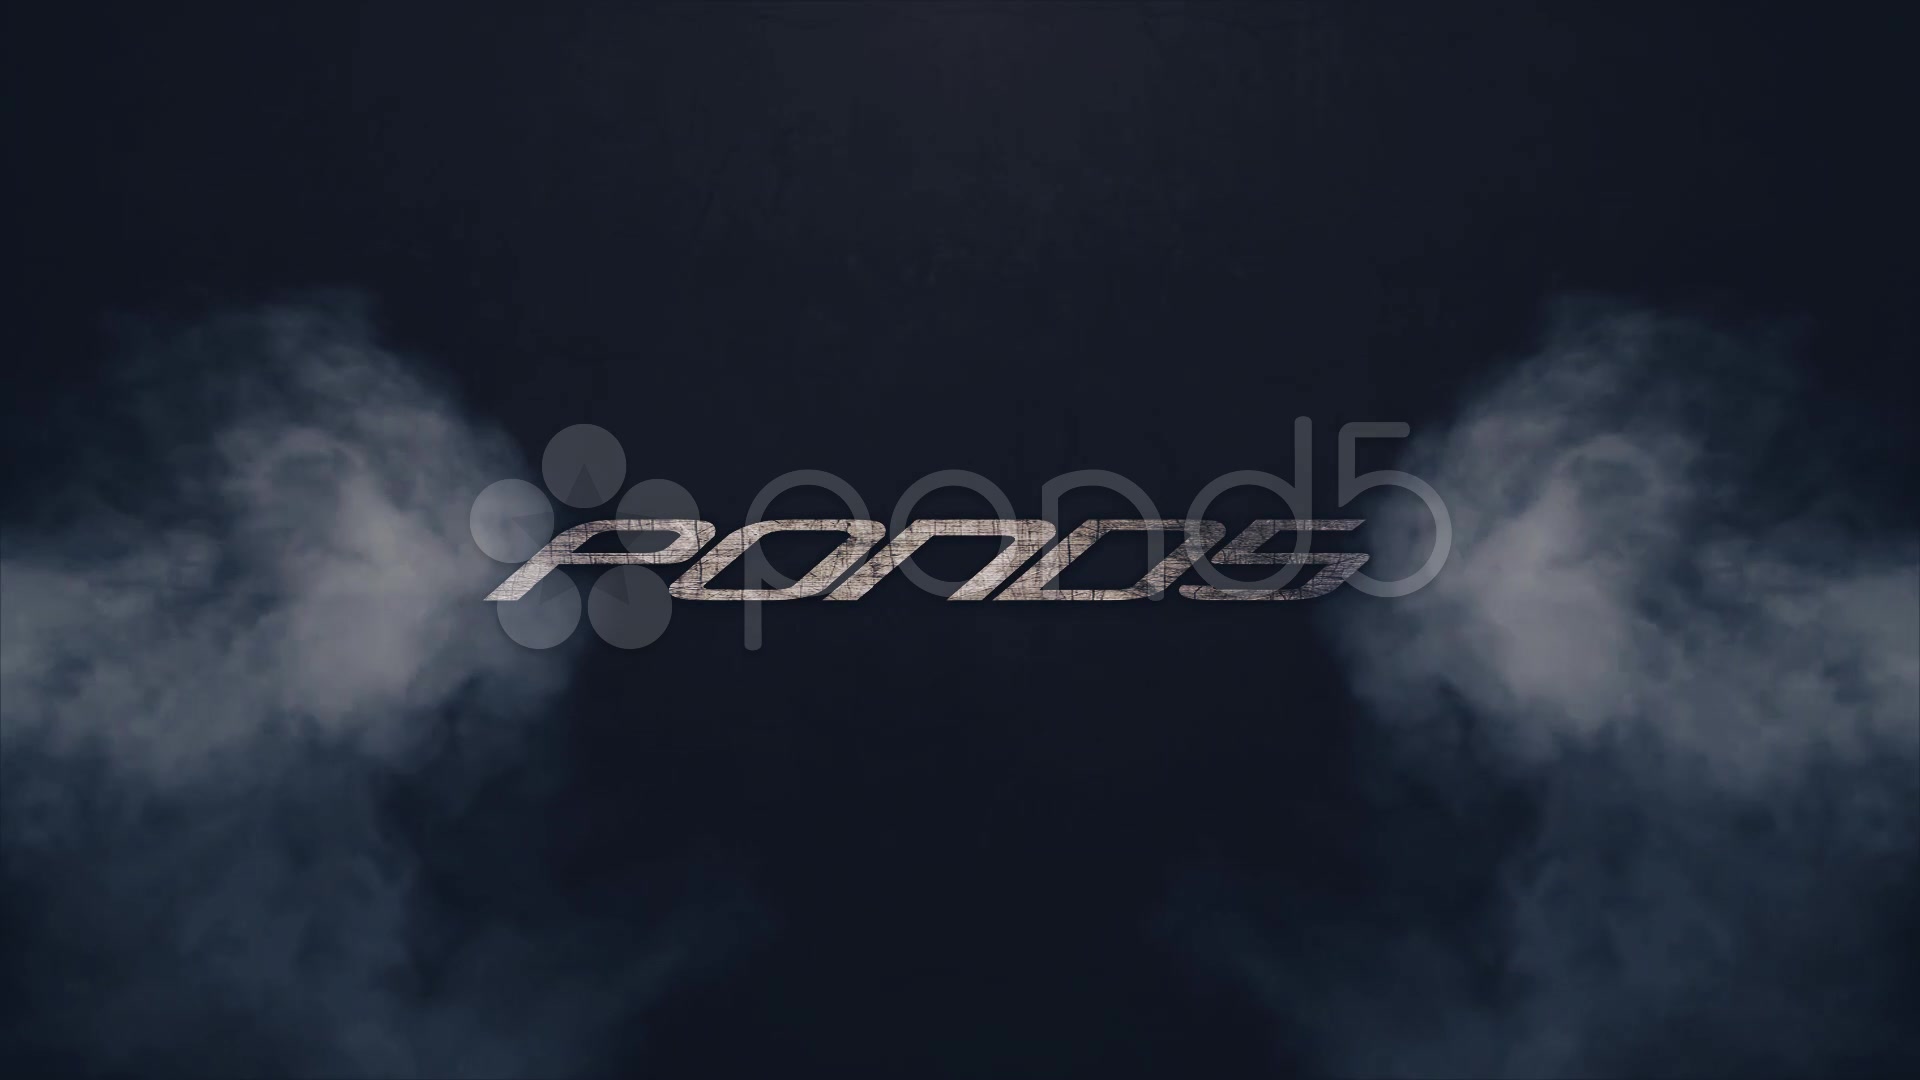 After Effects Project - Pond5 Metal Intro With Smoke 37186883